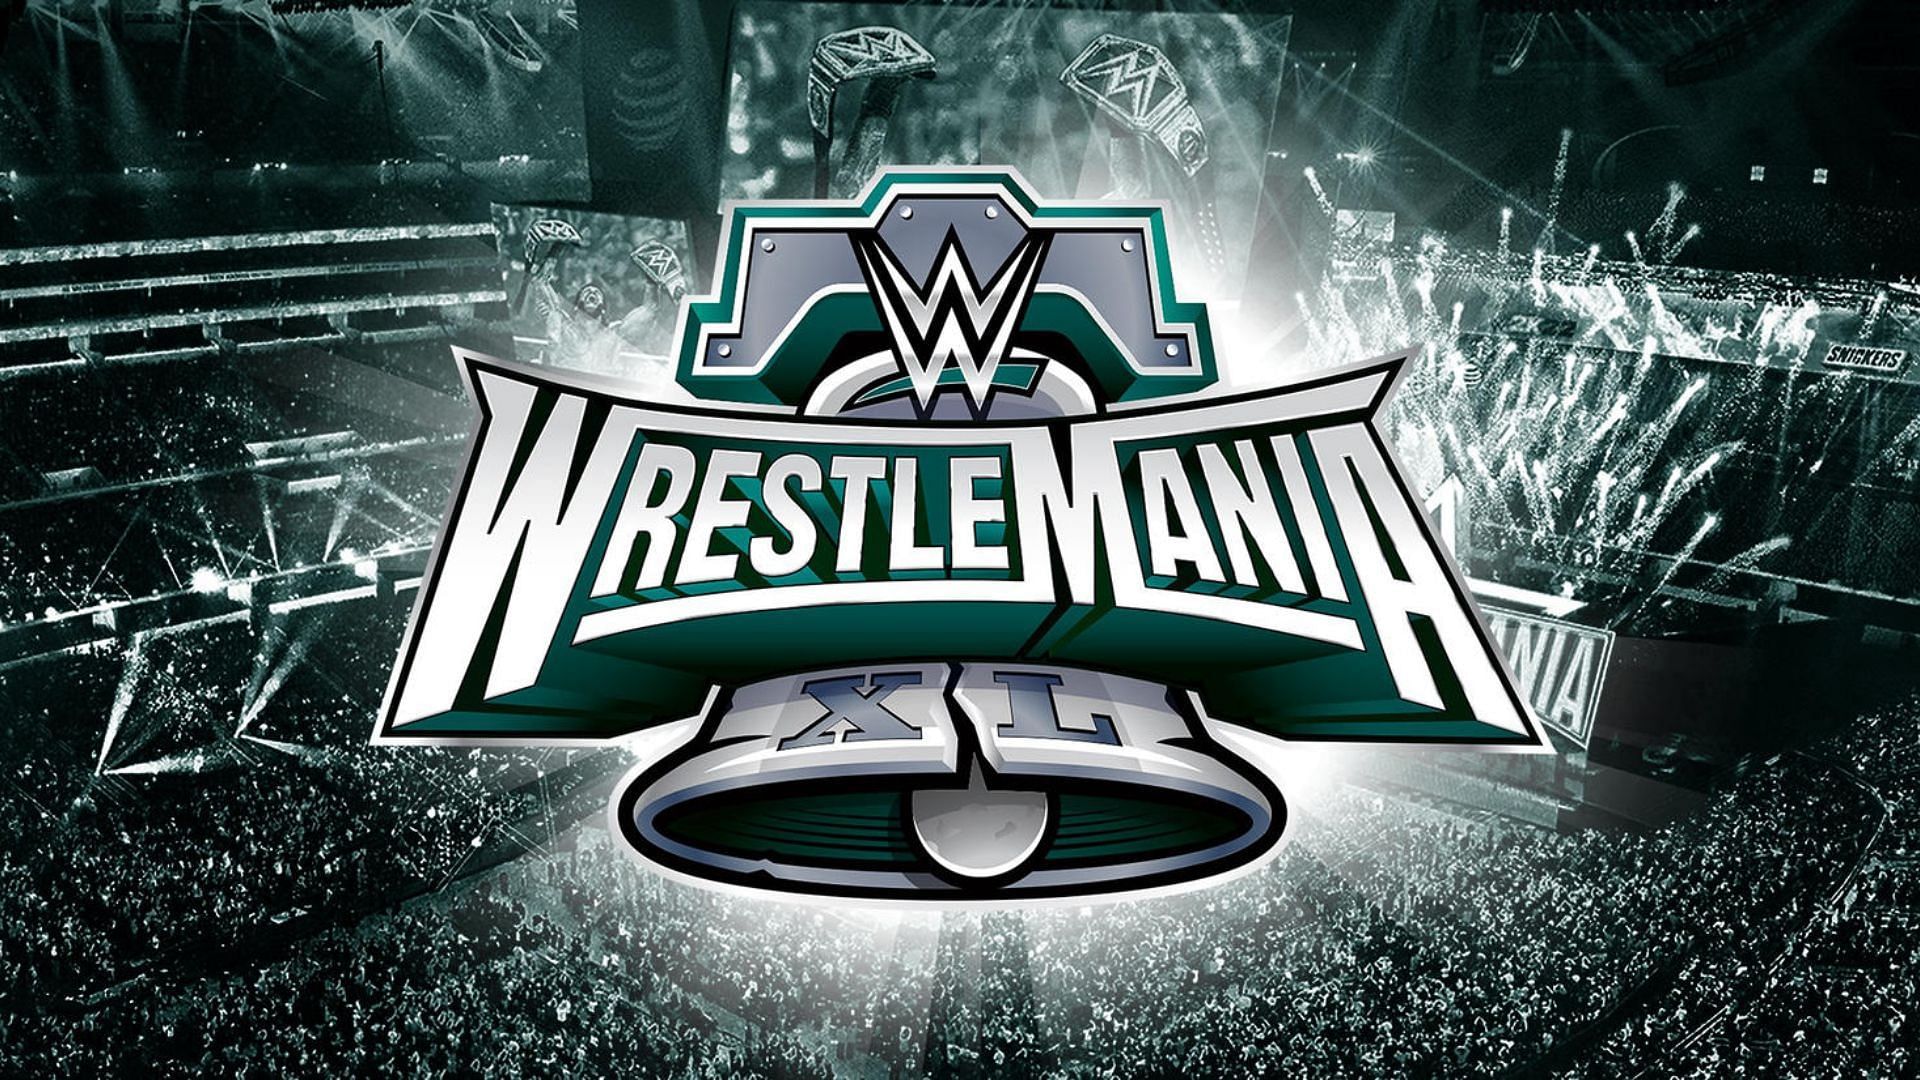 WWE WrestleMania XL will be in Philadelphia on April 6 and 7.